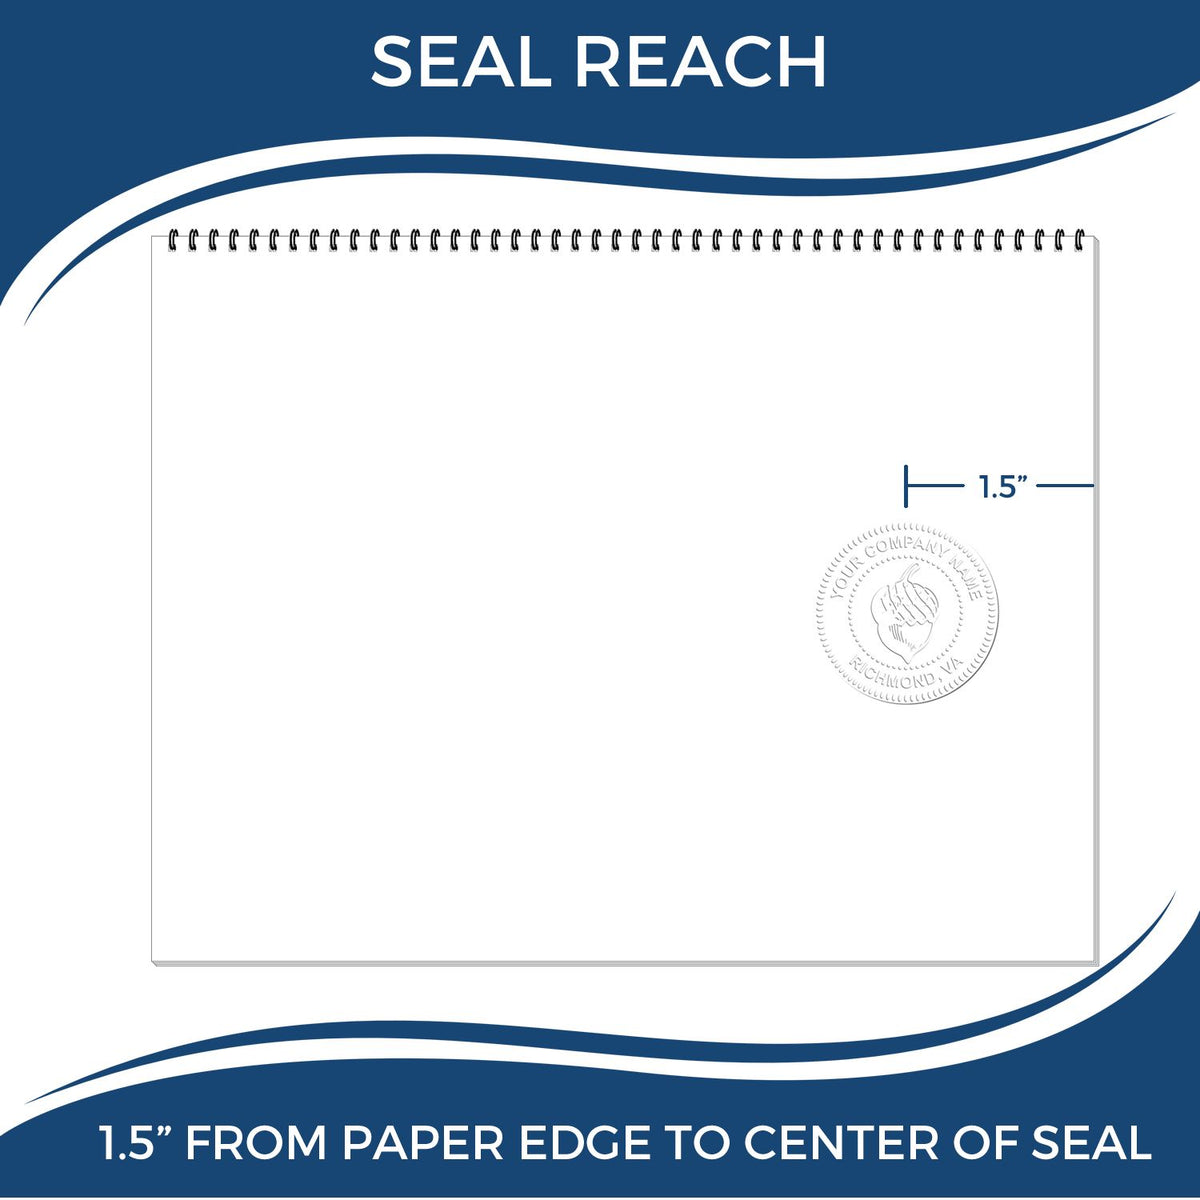 An infographic showing the seal reach which is represented by a ruler and a miniature seal image of the Gift Alaska Land Surveyor Seal